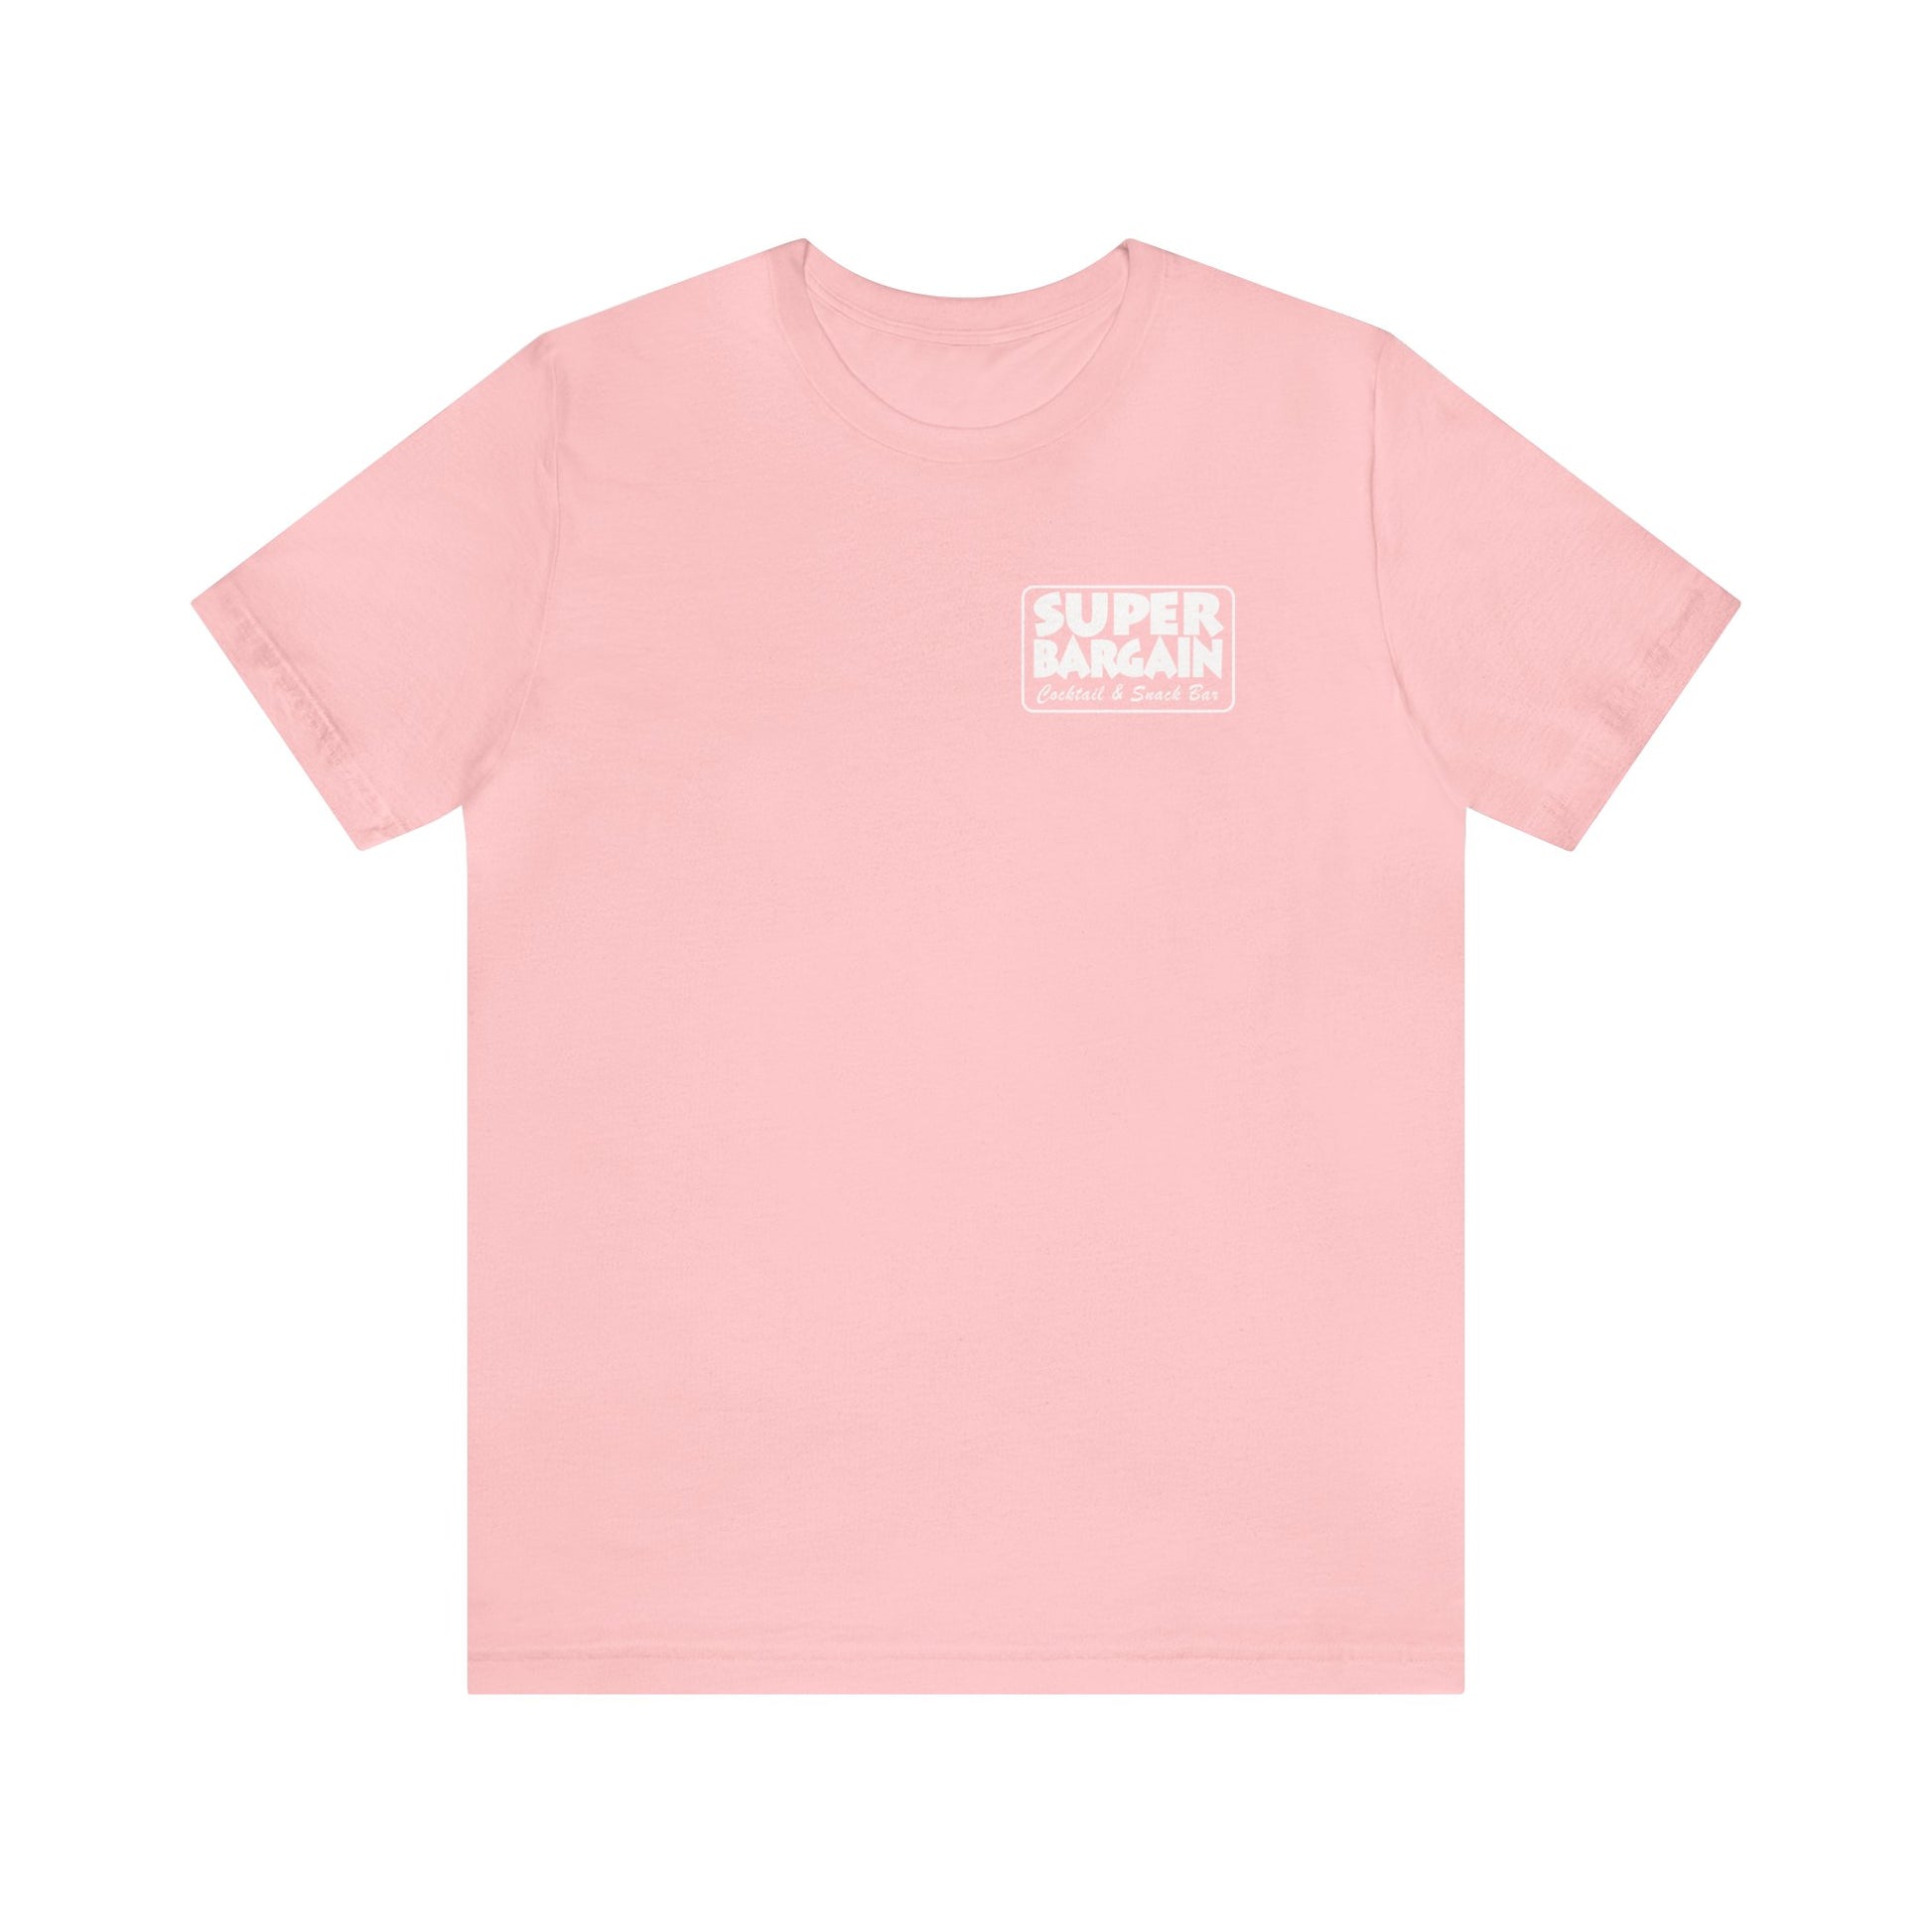 A light pink Unisex Jersey Short Sleeve Monochrome Logo Tee with the phrase "SUPER BARGAIN" in white inside a red rectangle printed on the left chest area, featuring a subtle "Cabbagetown, Toronto" detail on the sleeve. The background is plain white by Printify.